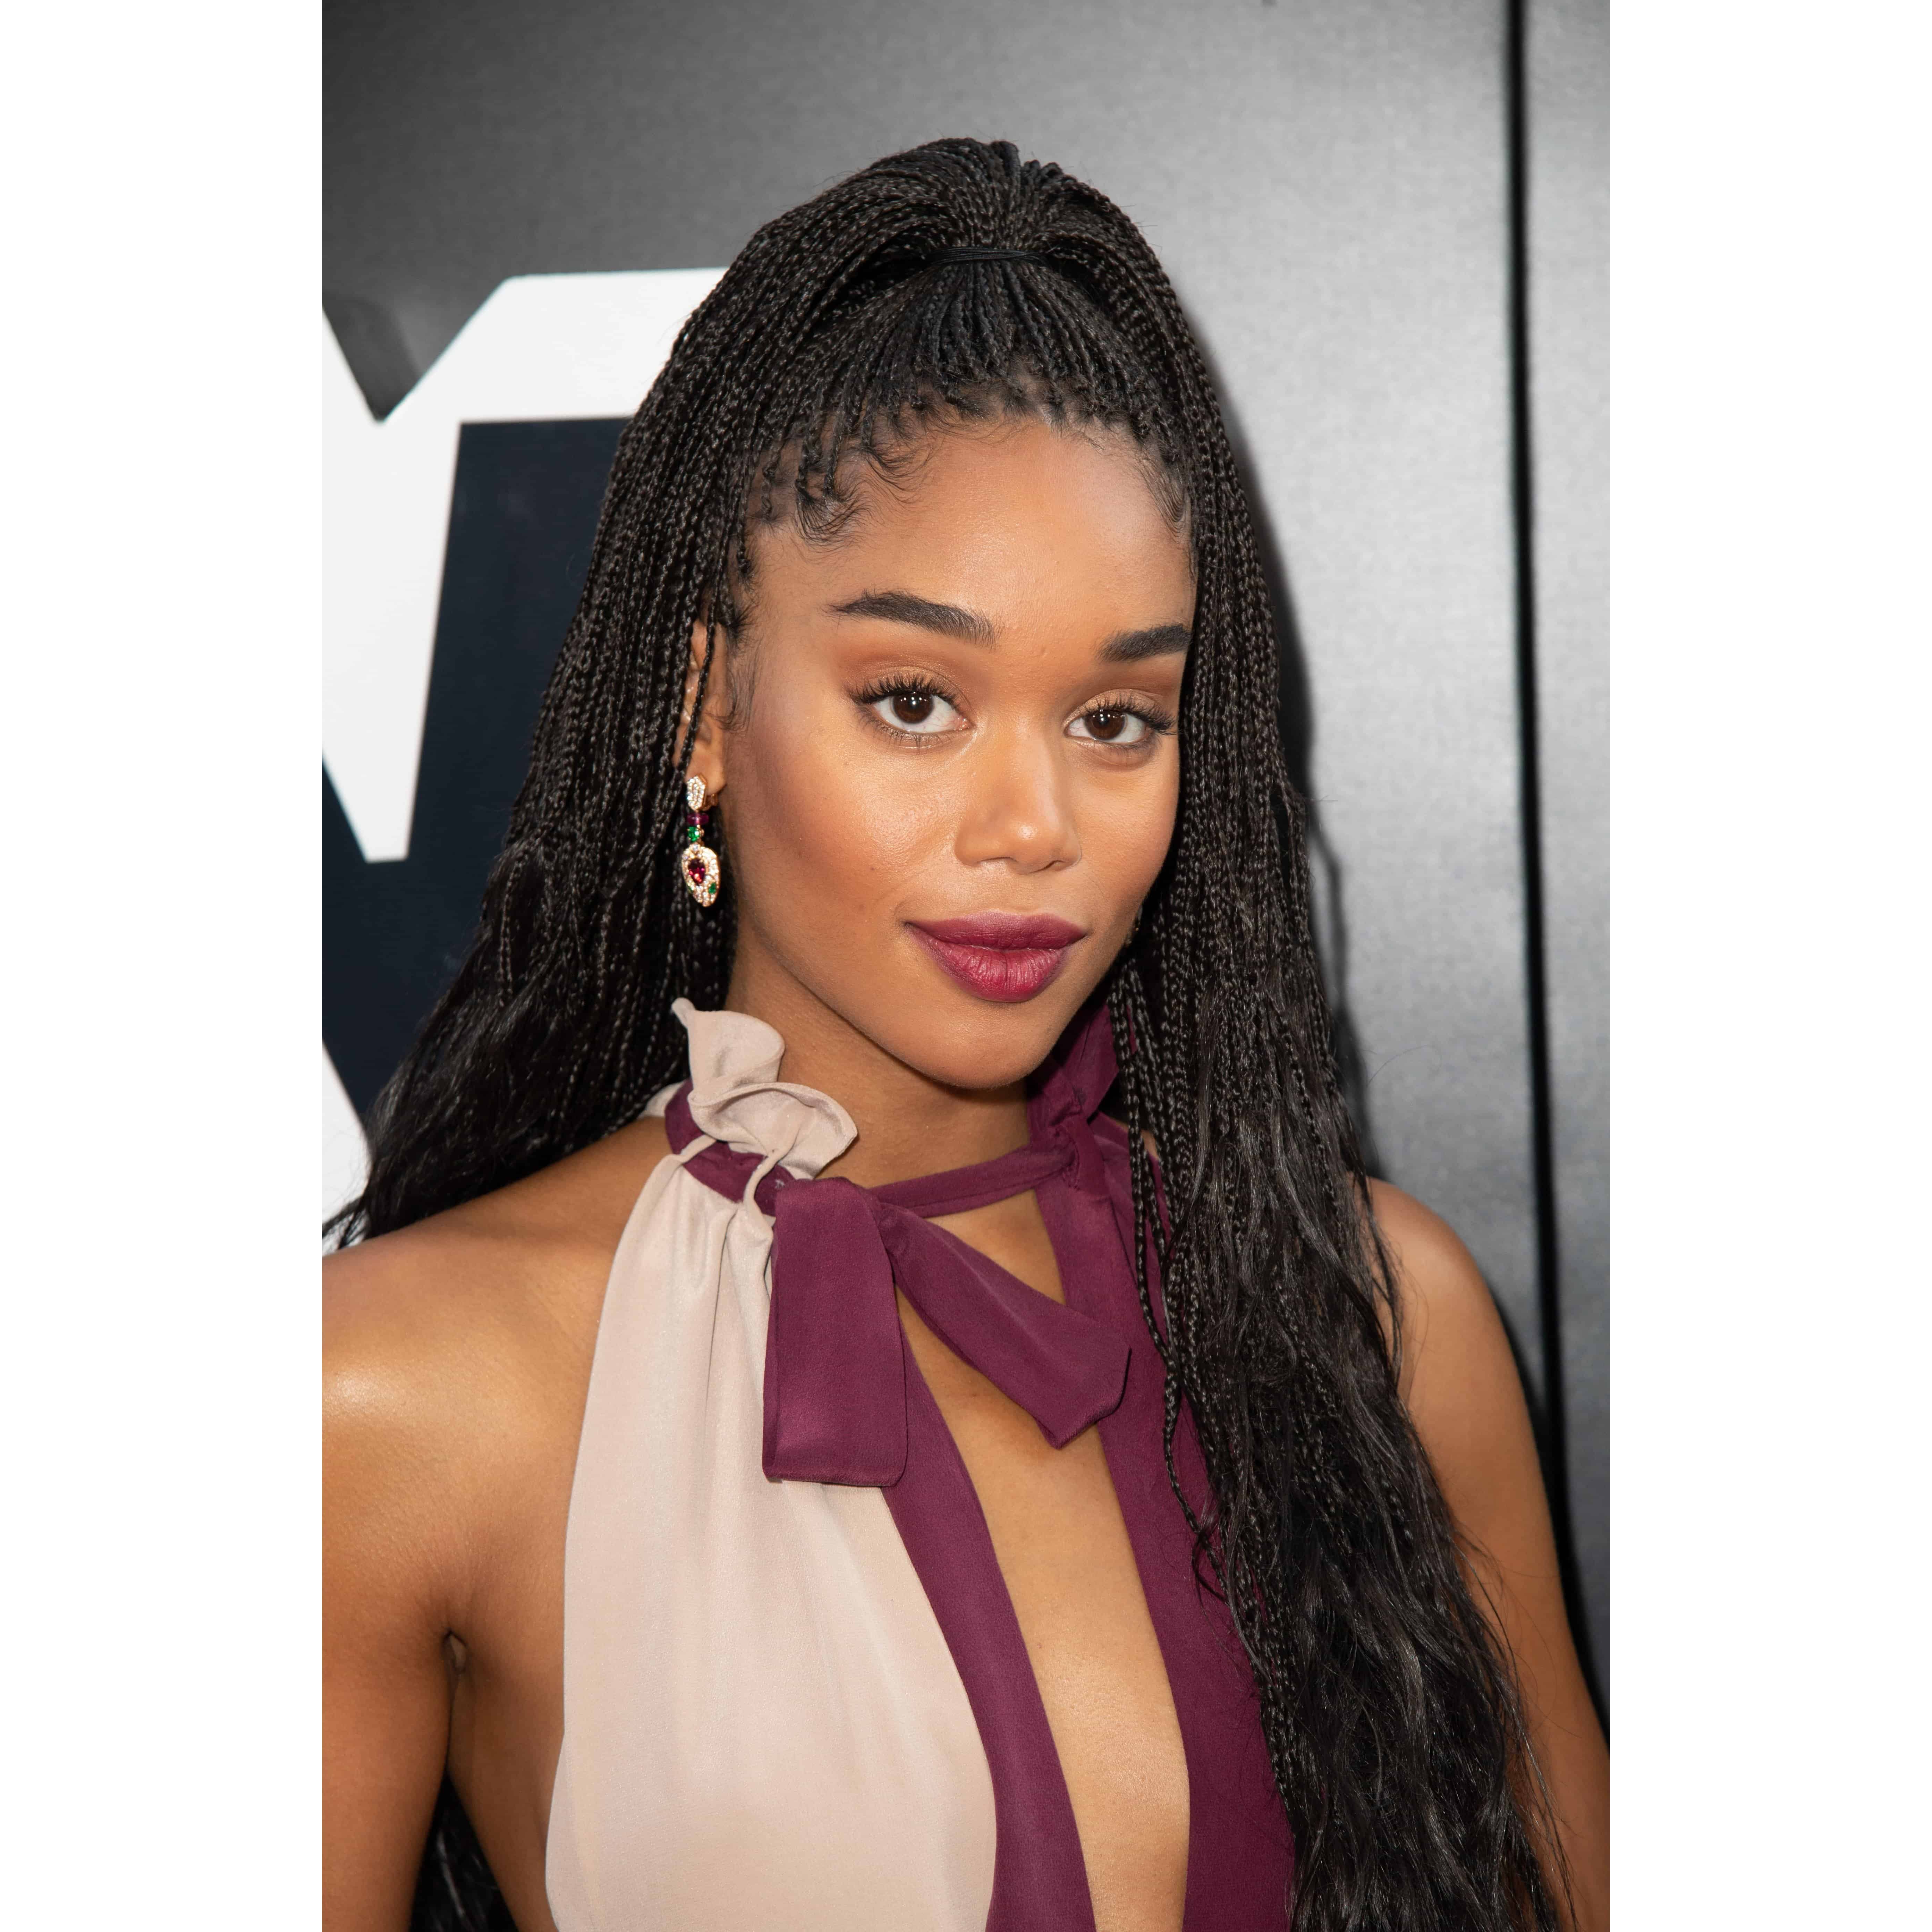 30 Black Braided Hairstyles You Can Try For a Fancy ...